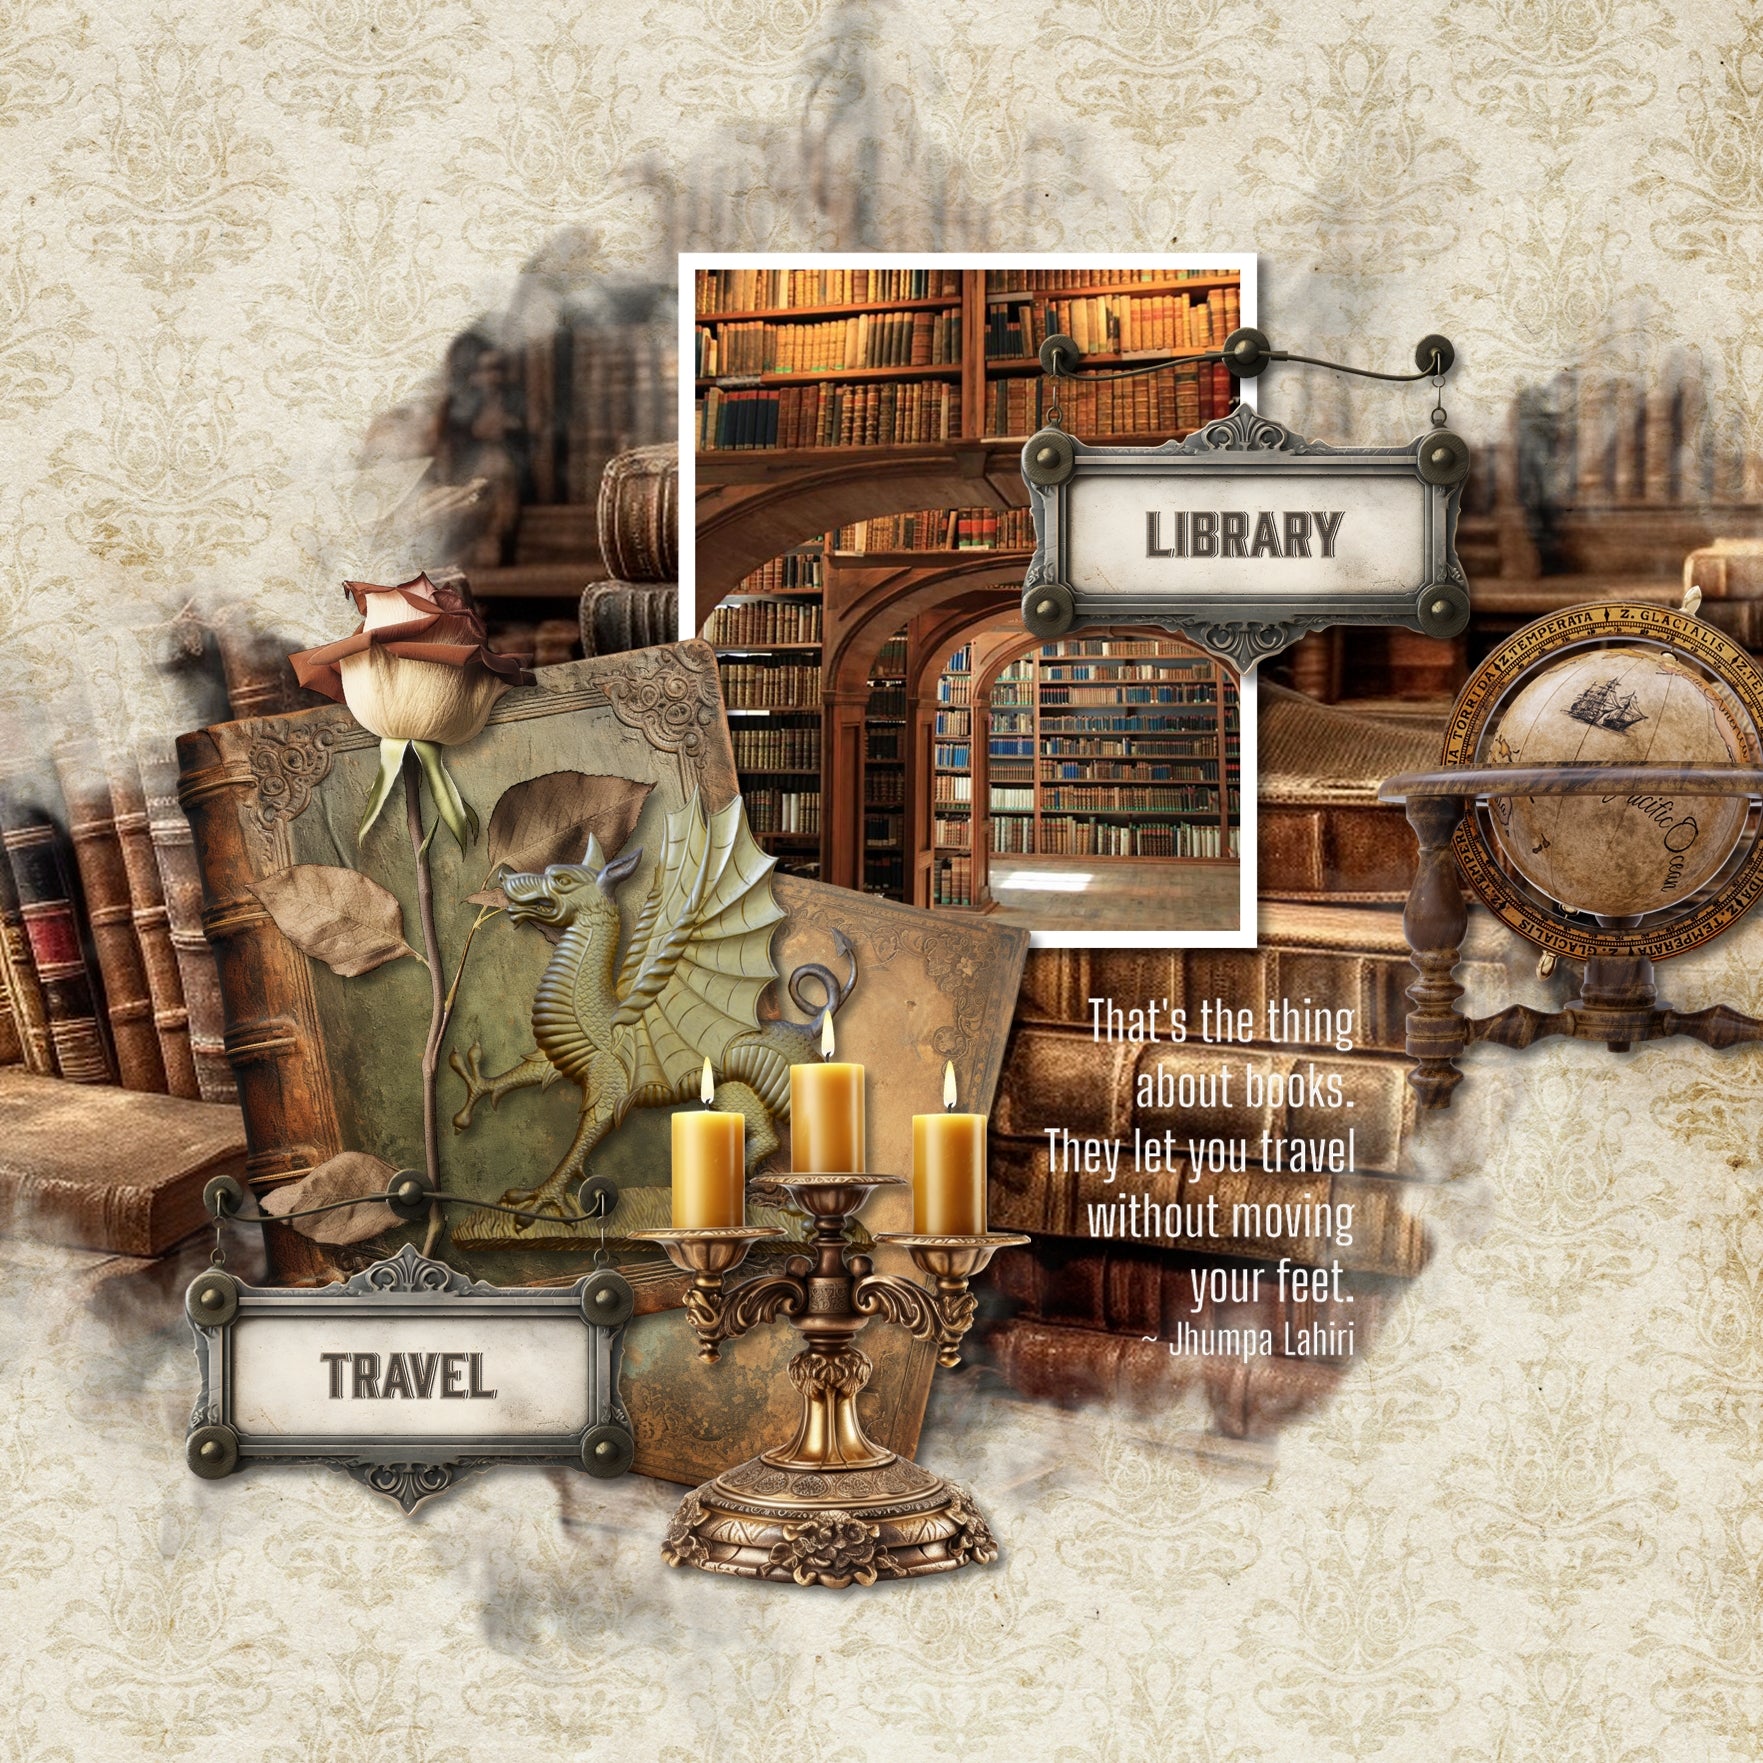 Great for genealogy and family history albums and keepsake digital art pages, these beautiful vintage book and library overlays with transparent edges by Lucky Girl Creative blend seamlessly into any background paper and make the perfect backdrop for authentic scrapbook pages. Overlays include stacks of books, bookshelves, library books, and more!